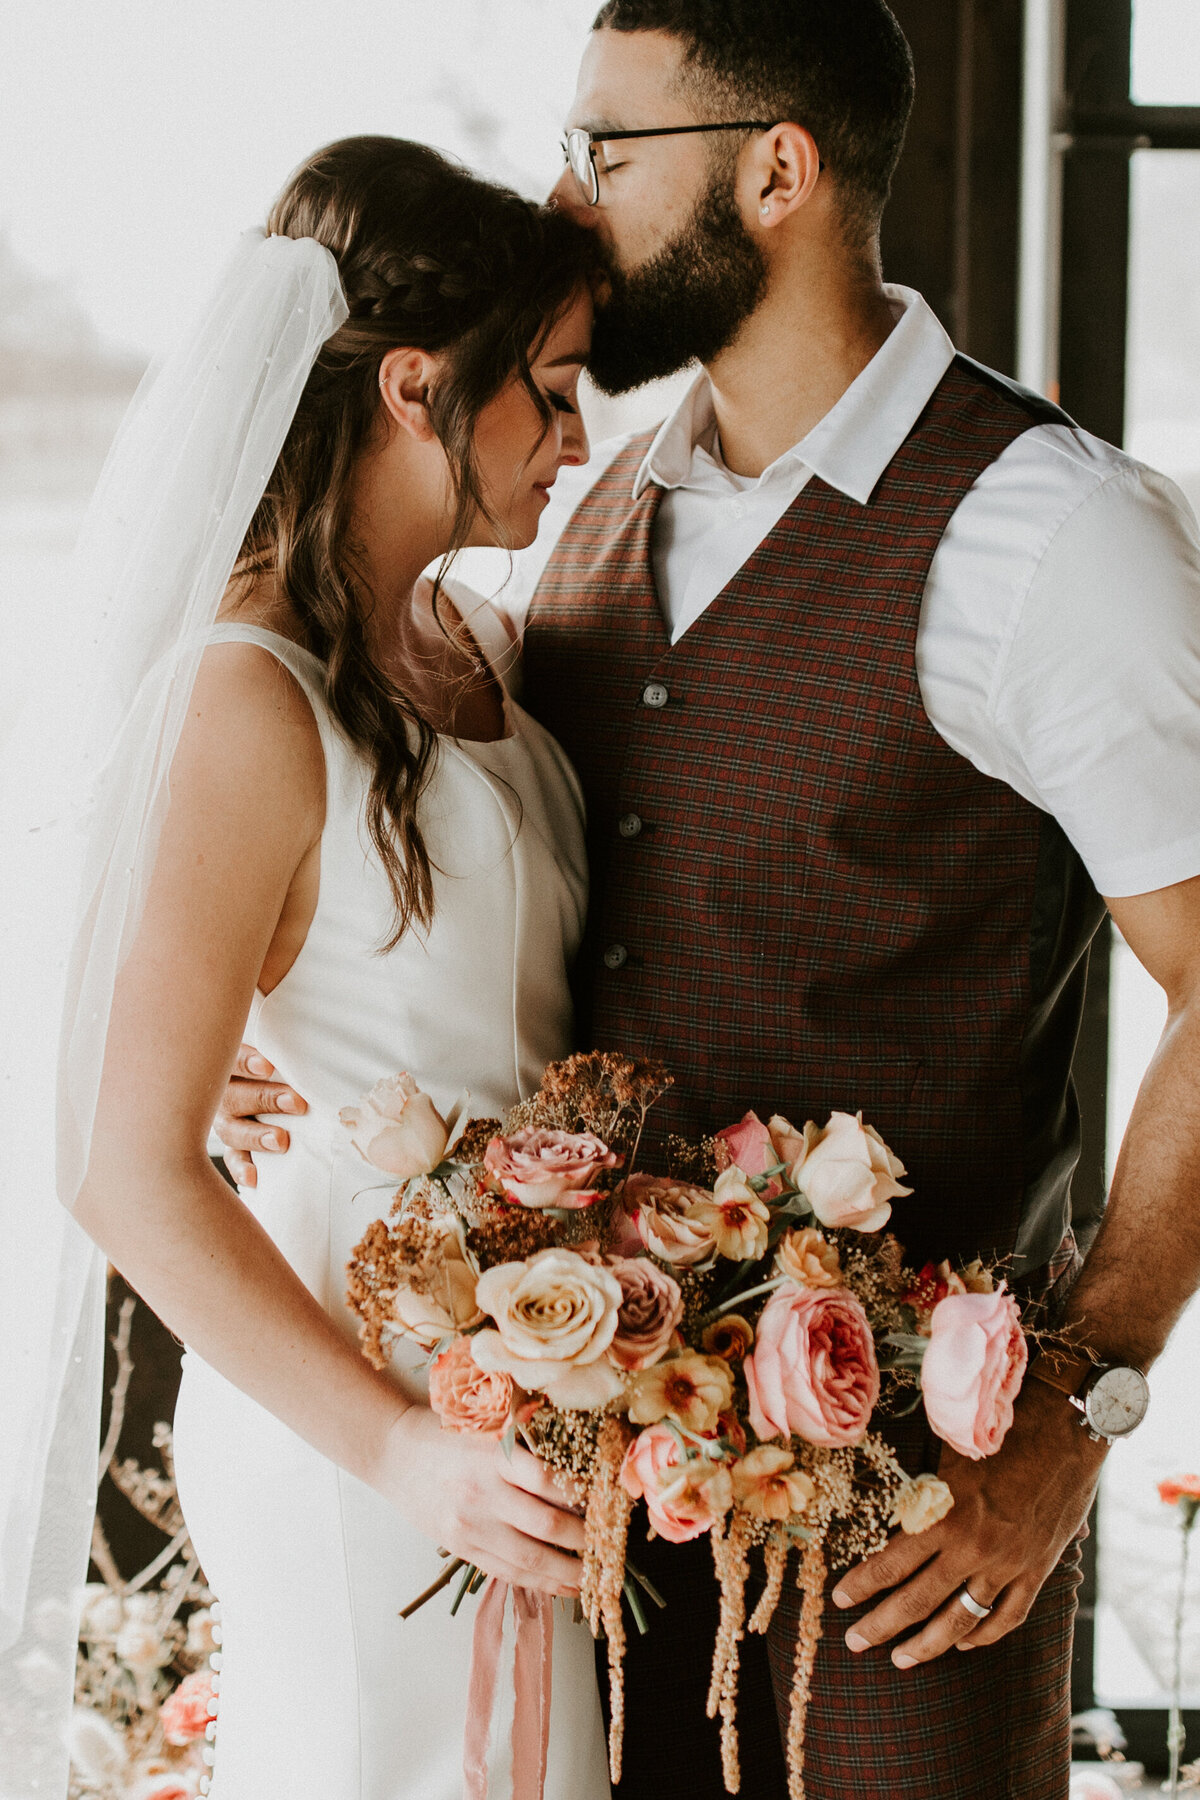 A groom wearing a brown suit kisses bride wearing a white wedding gown on the forehead while she holds a bouquet.